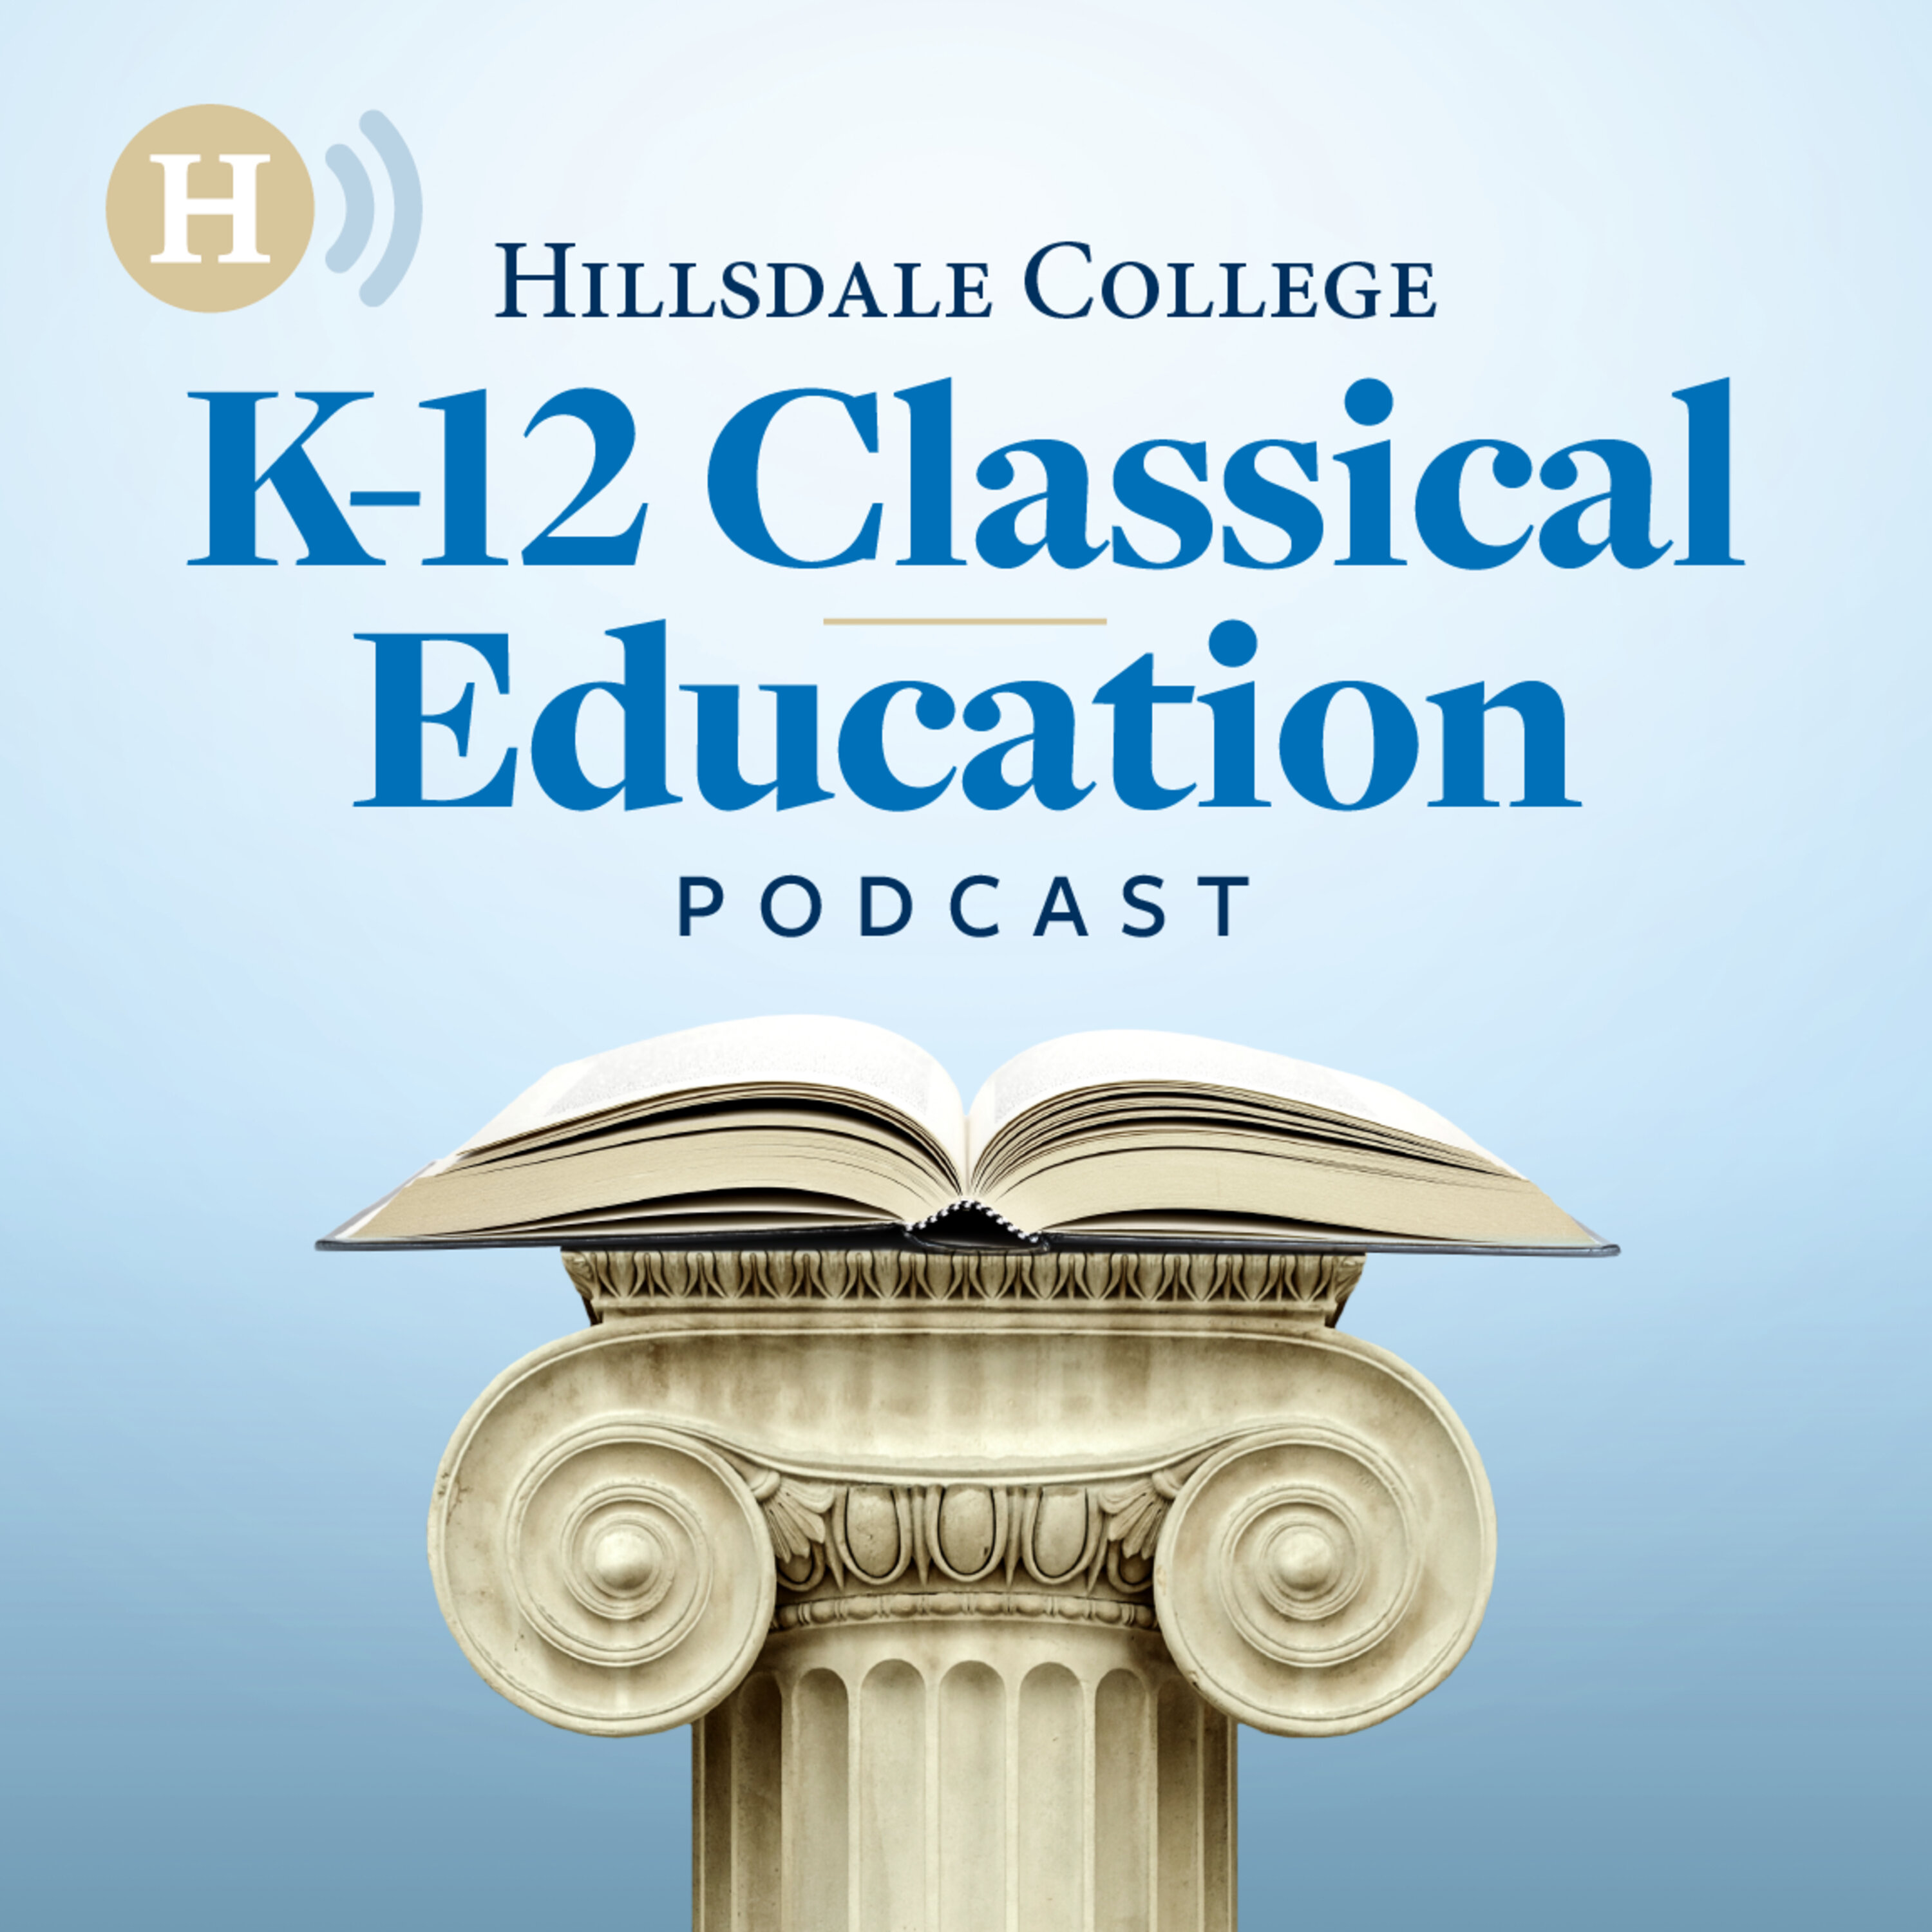 Matthew Sauer: Admissions and the Classical Student